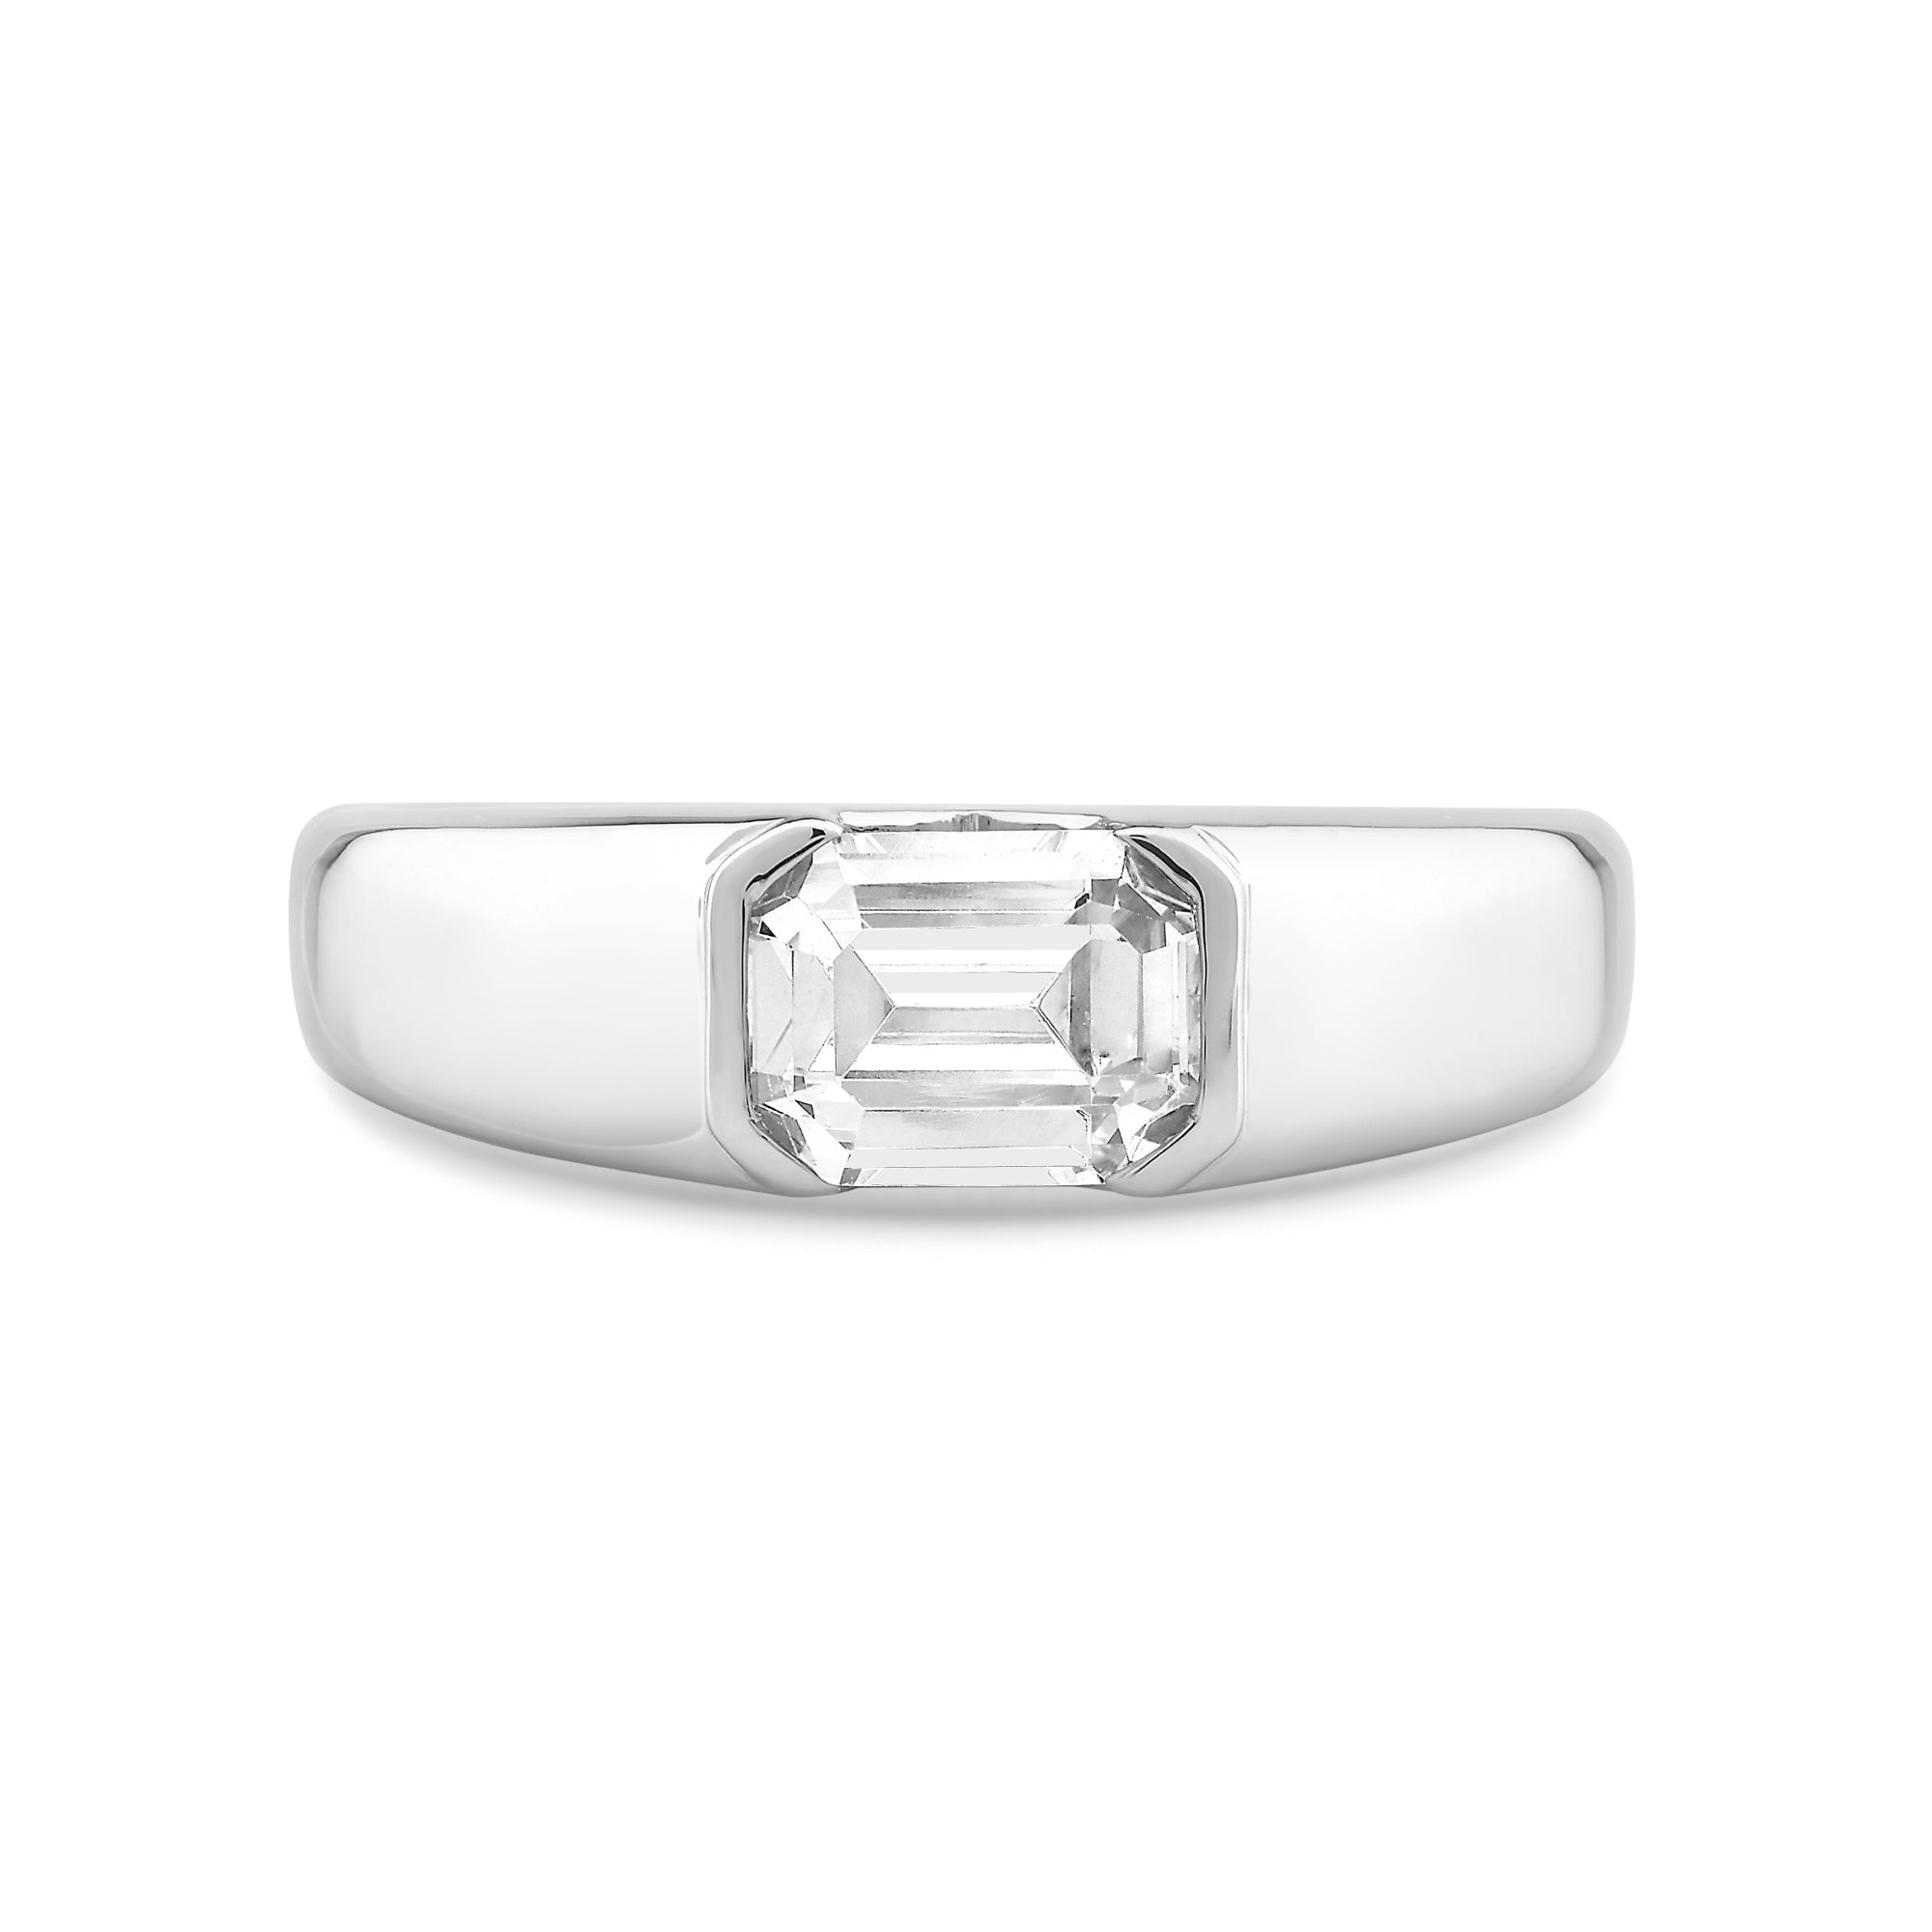 Half Bezel Bevel Edged Mens Engagement Ring – With Clarity